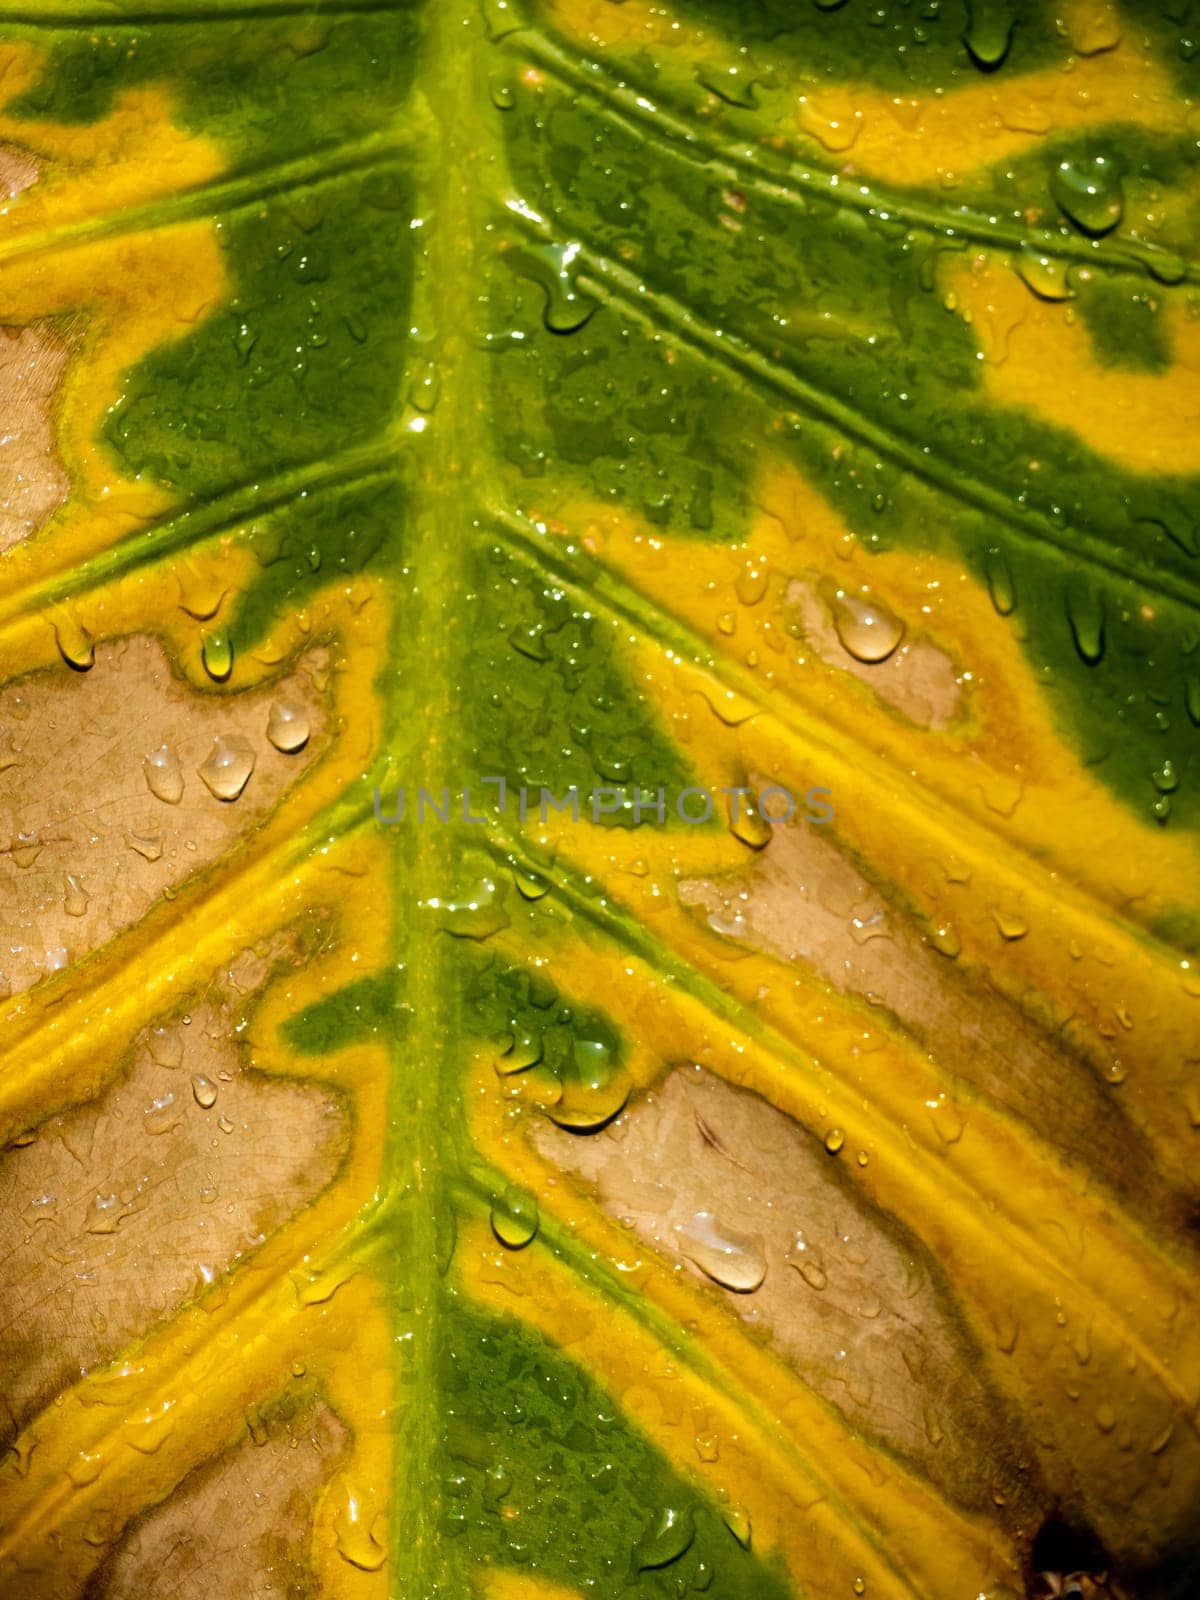 The wounded surface of a withering Alocasia leaf